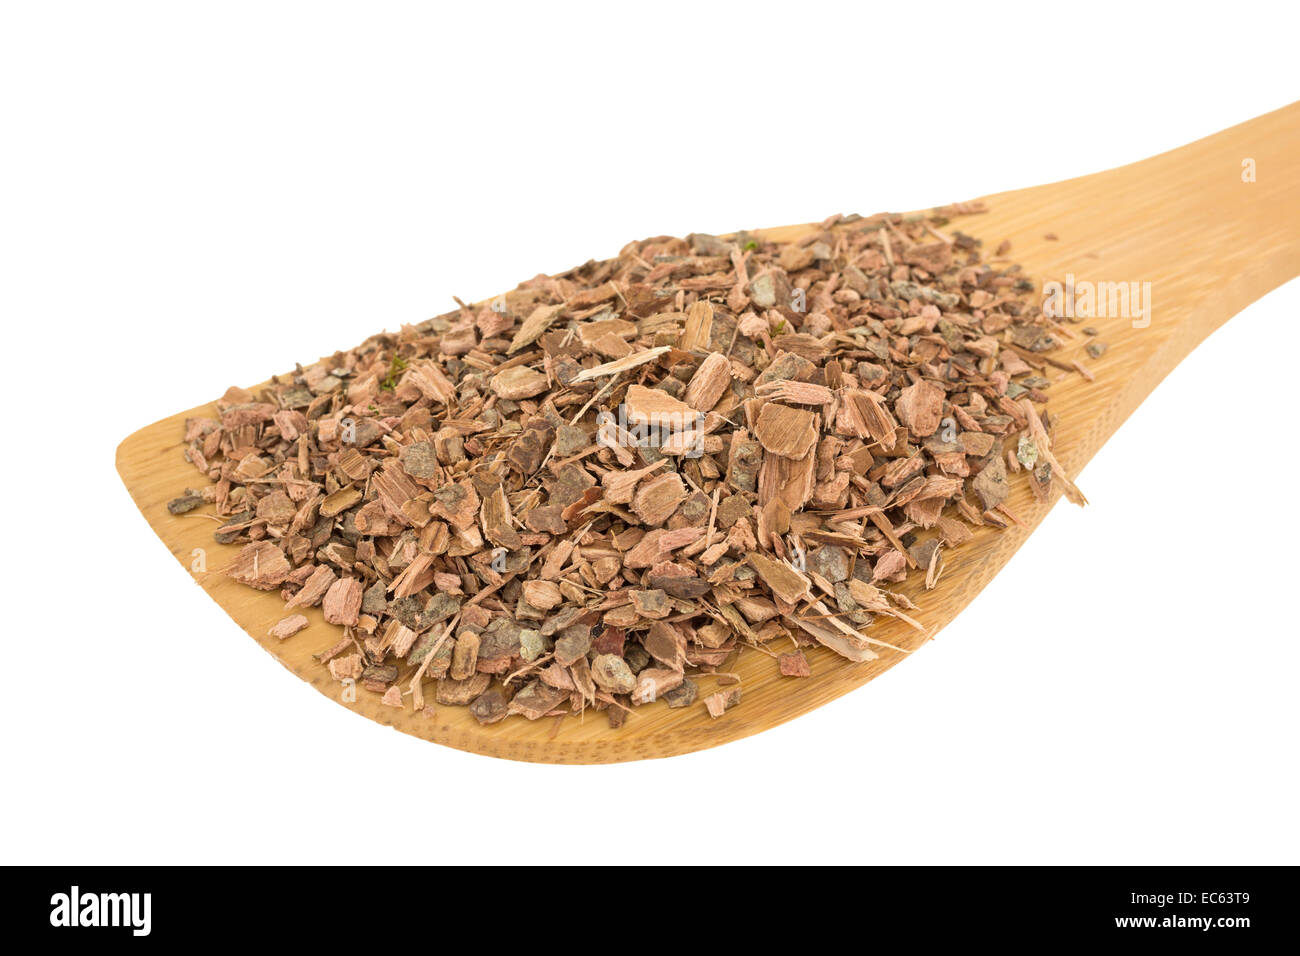 A wood spoon filled with witch hazel bark on a white background. Stock Photo